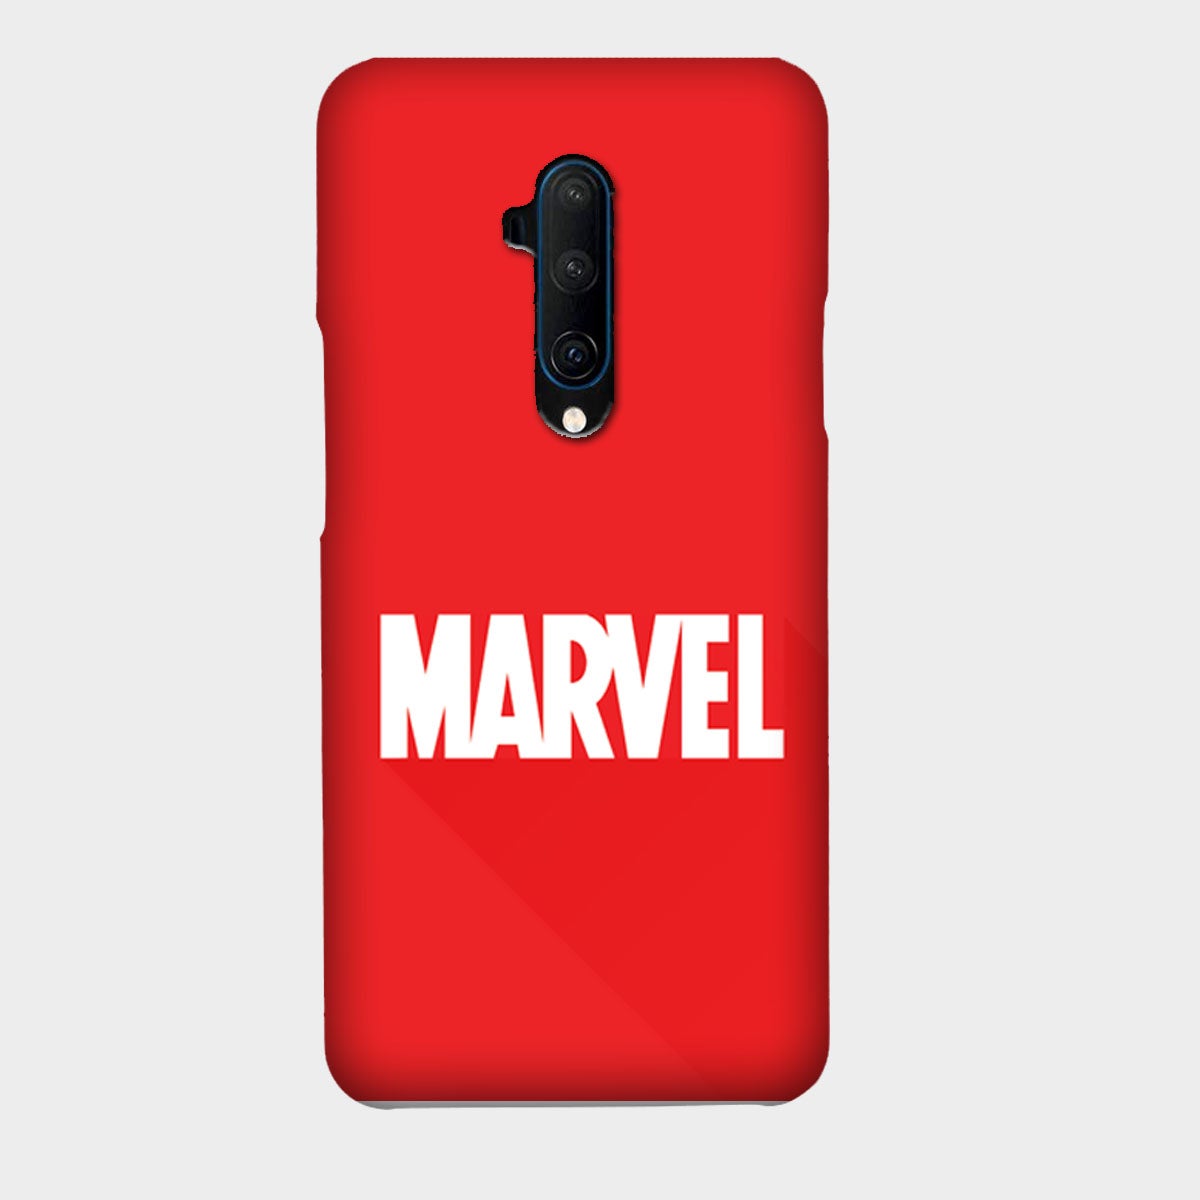 Marvel - Red - Mobile Phone Cover - Hard Case - OnePlus